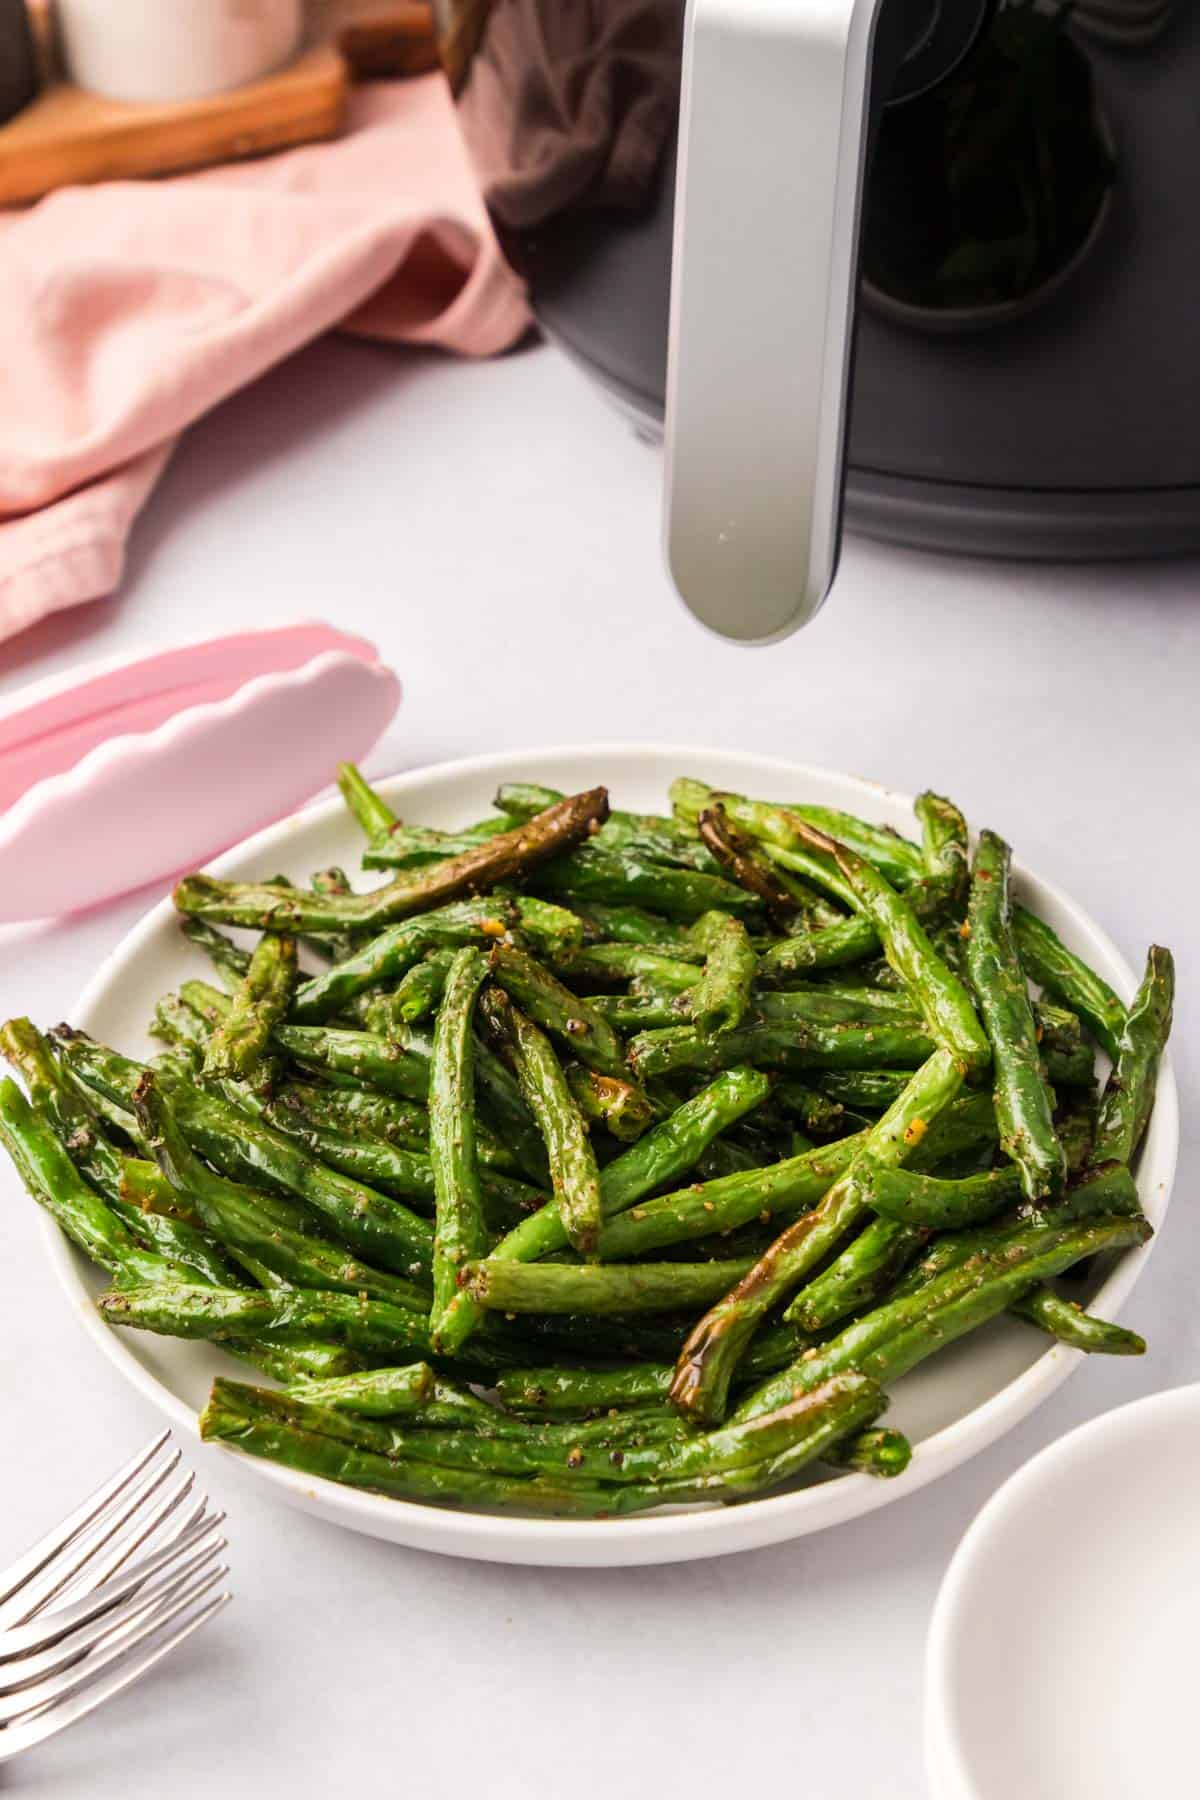 A plate of green beans with an air fryer in the background.